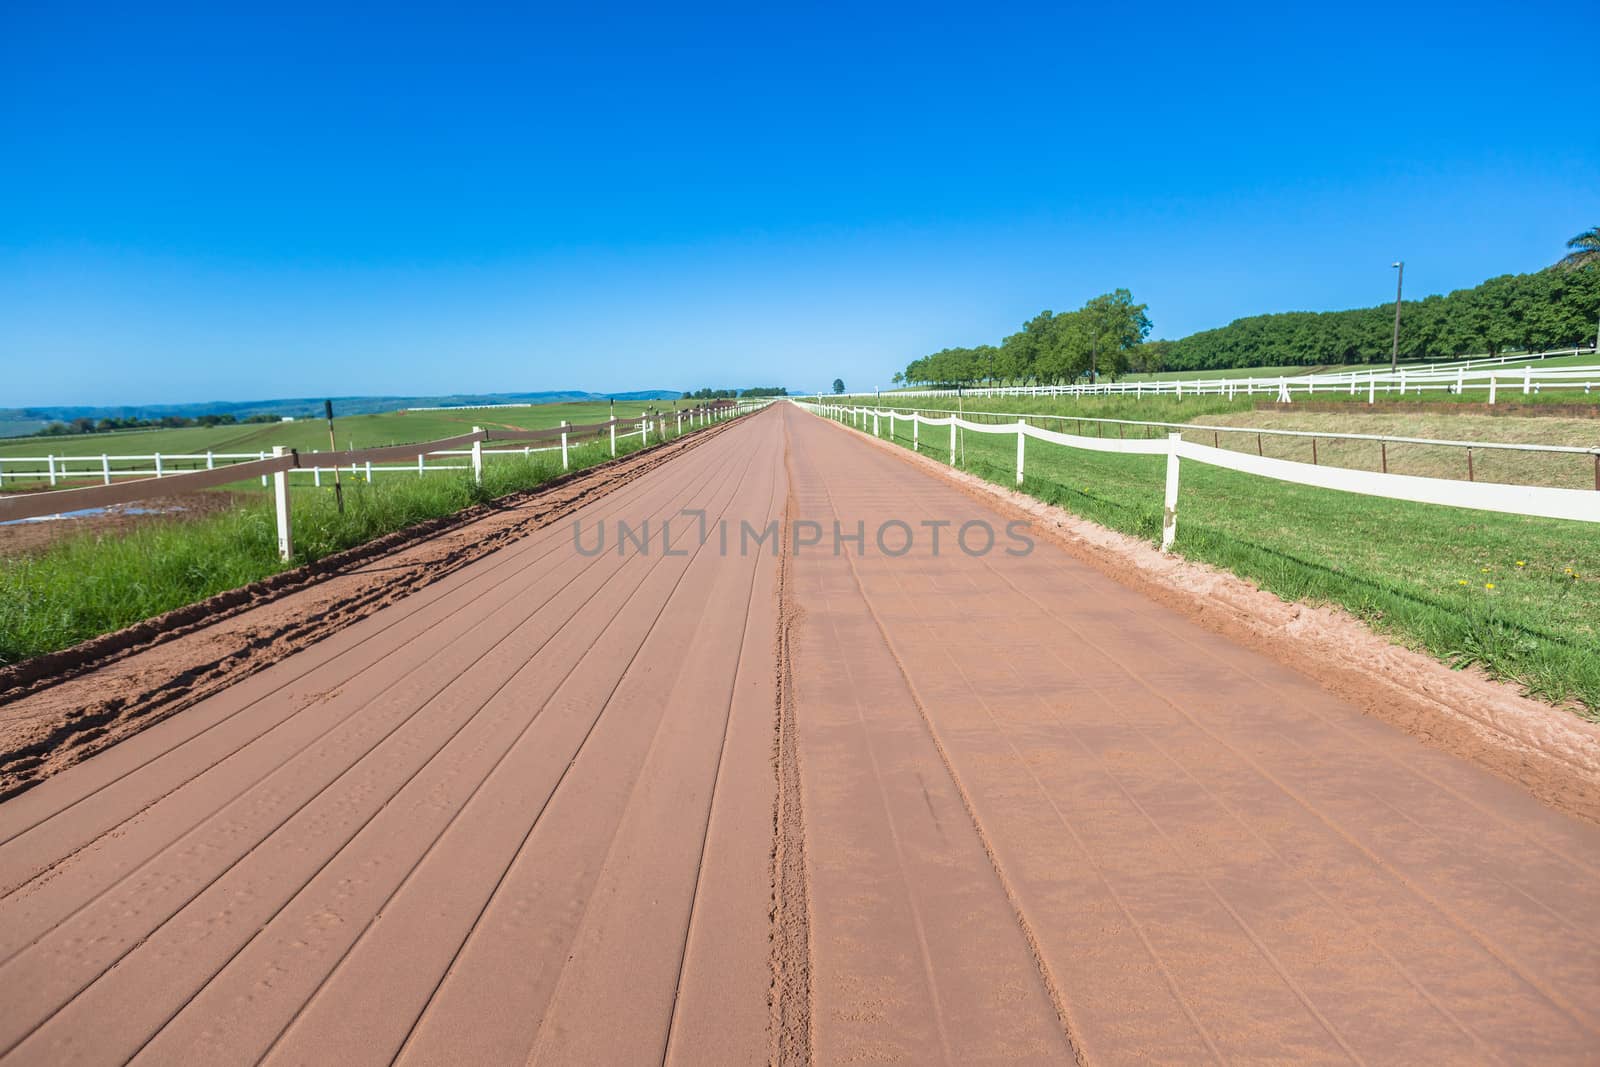 Smooth Sand Track straight with fence railing for race horses training